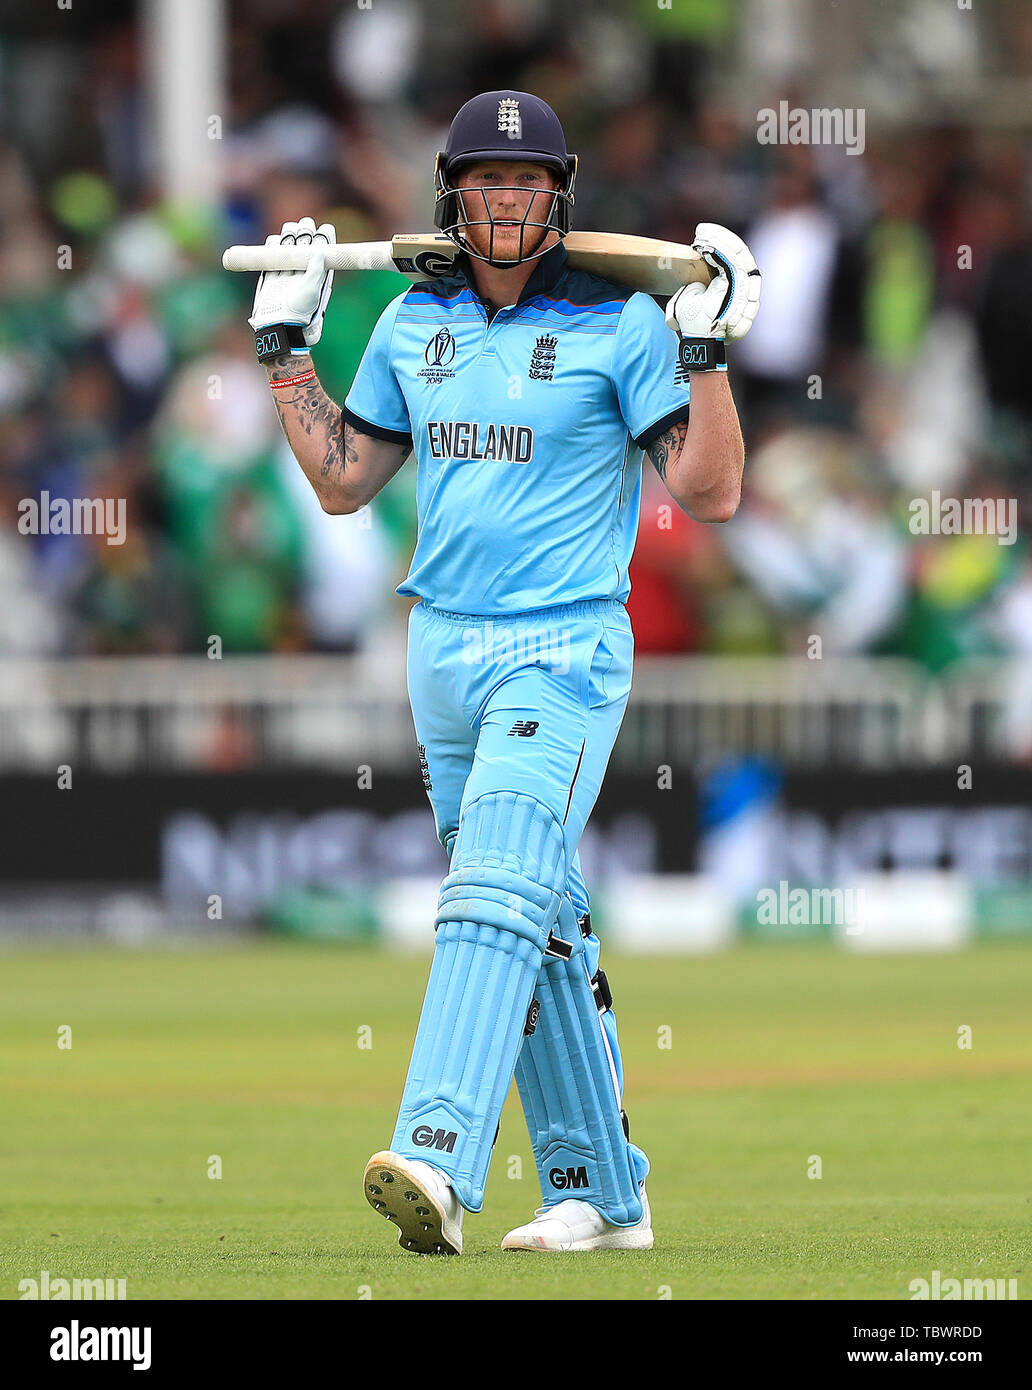 England's Ben Stokes walks off after being dismissed during the ICC Cricket World Cup group stage match at Trent Bridge, Nottingham. Stock Photo